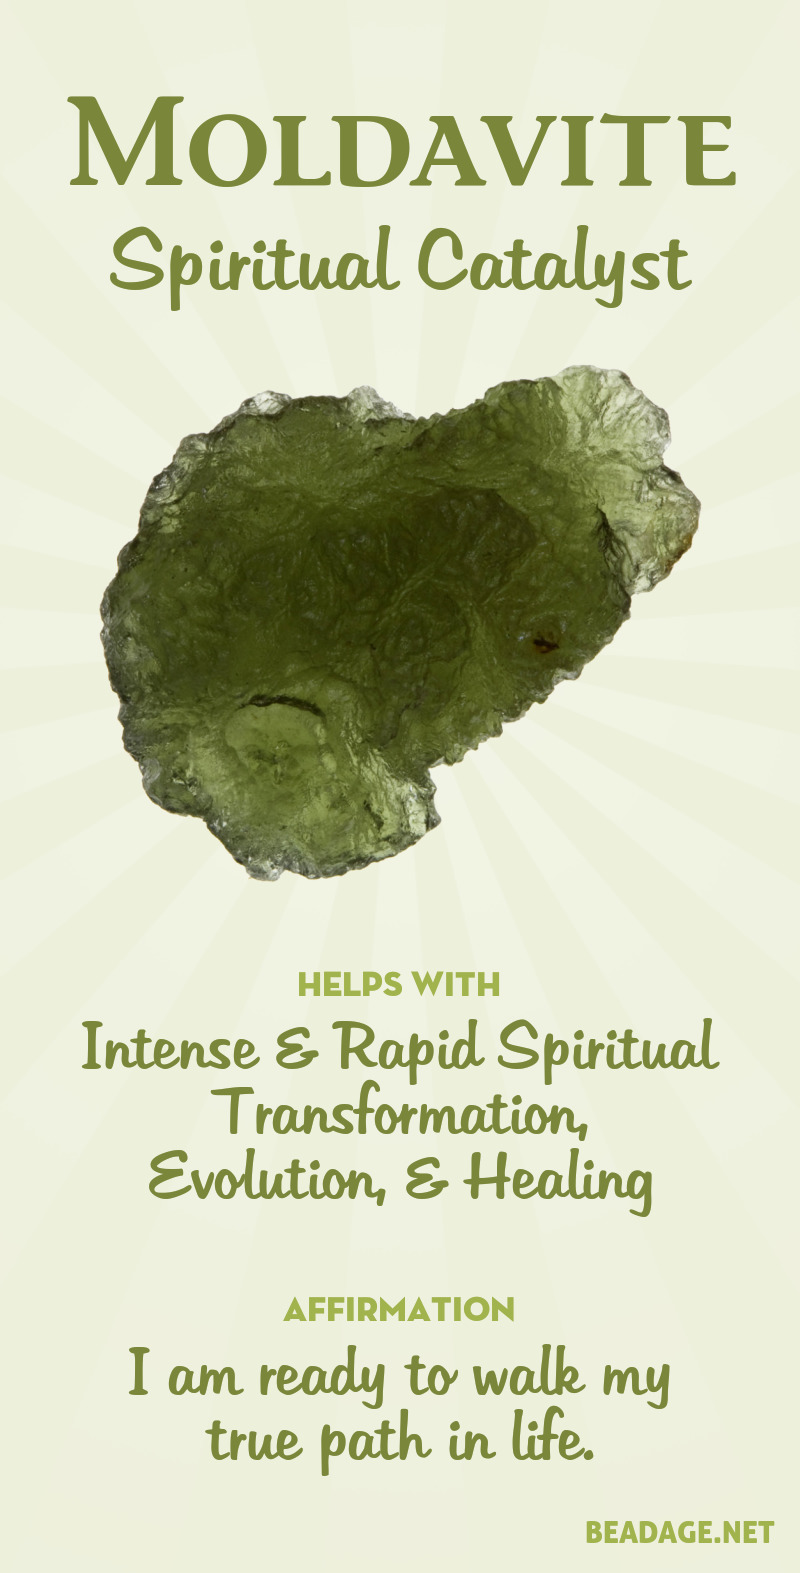 Moldavite is quite popular in metaphysical circles and is well-known as a stone of spiritual awakening and an accelerant of personal evolution. As a green stone it is most active with the heart chakra, but the power of this stone can act on and open all chakras and enhance any spiritual pursuit.  Learn more about Moldavite meaning + healing properties, benefits & more. Visit to find gemstone meanings & info about crystal healing. #gemstones #crystals #crystalhealing #beadage